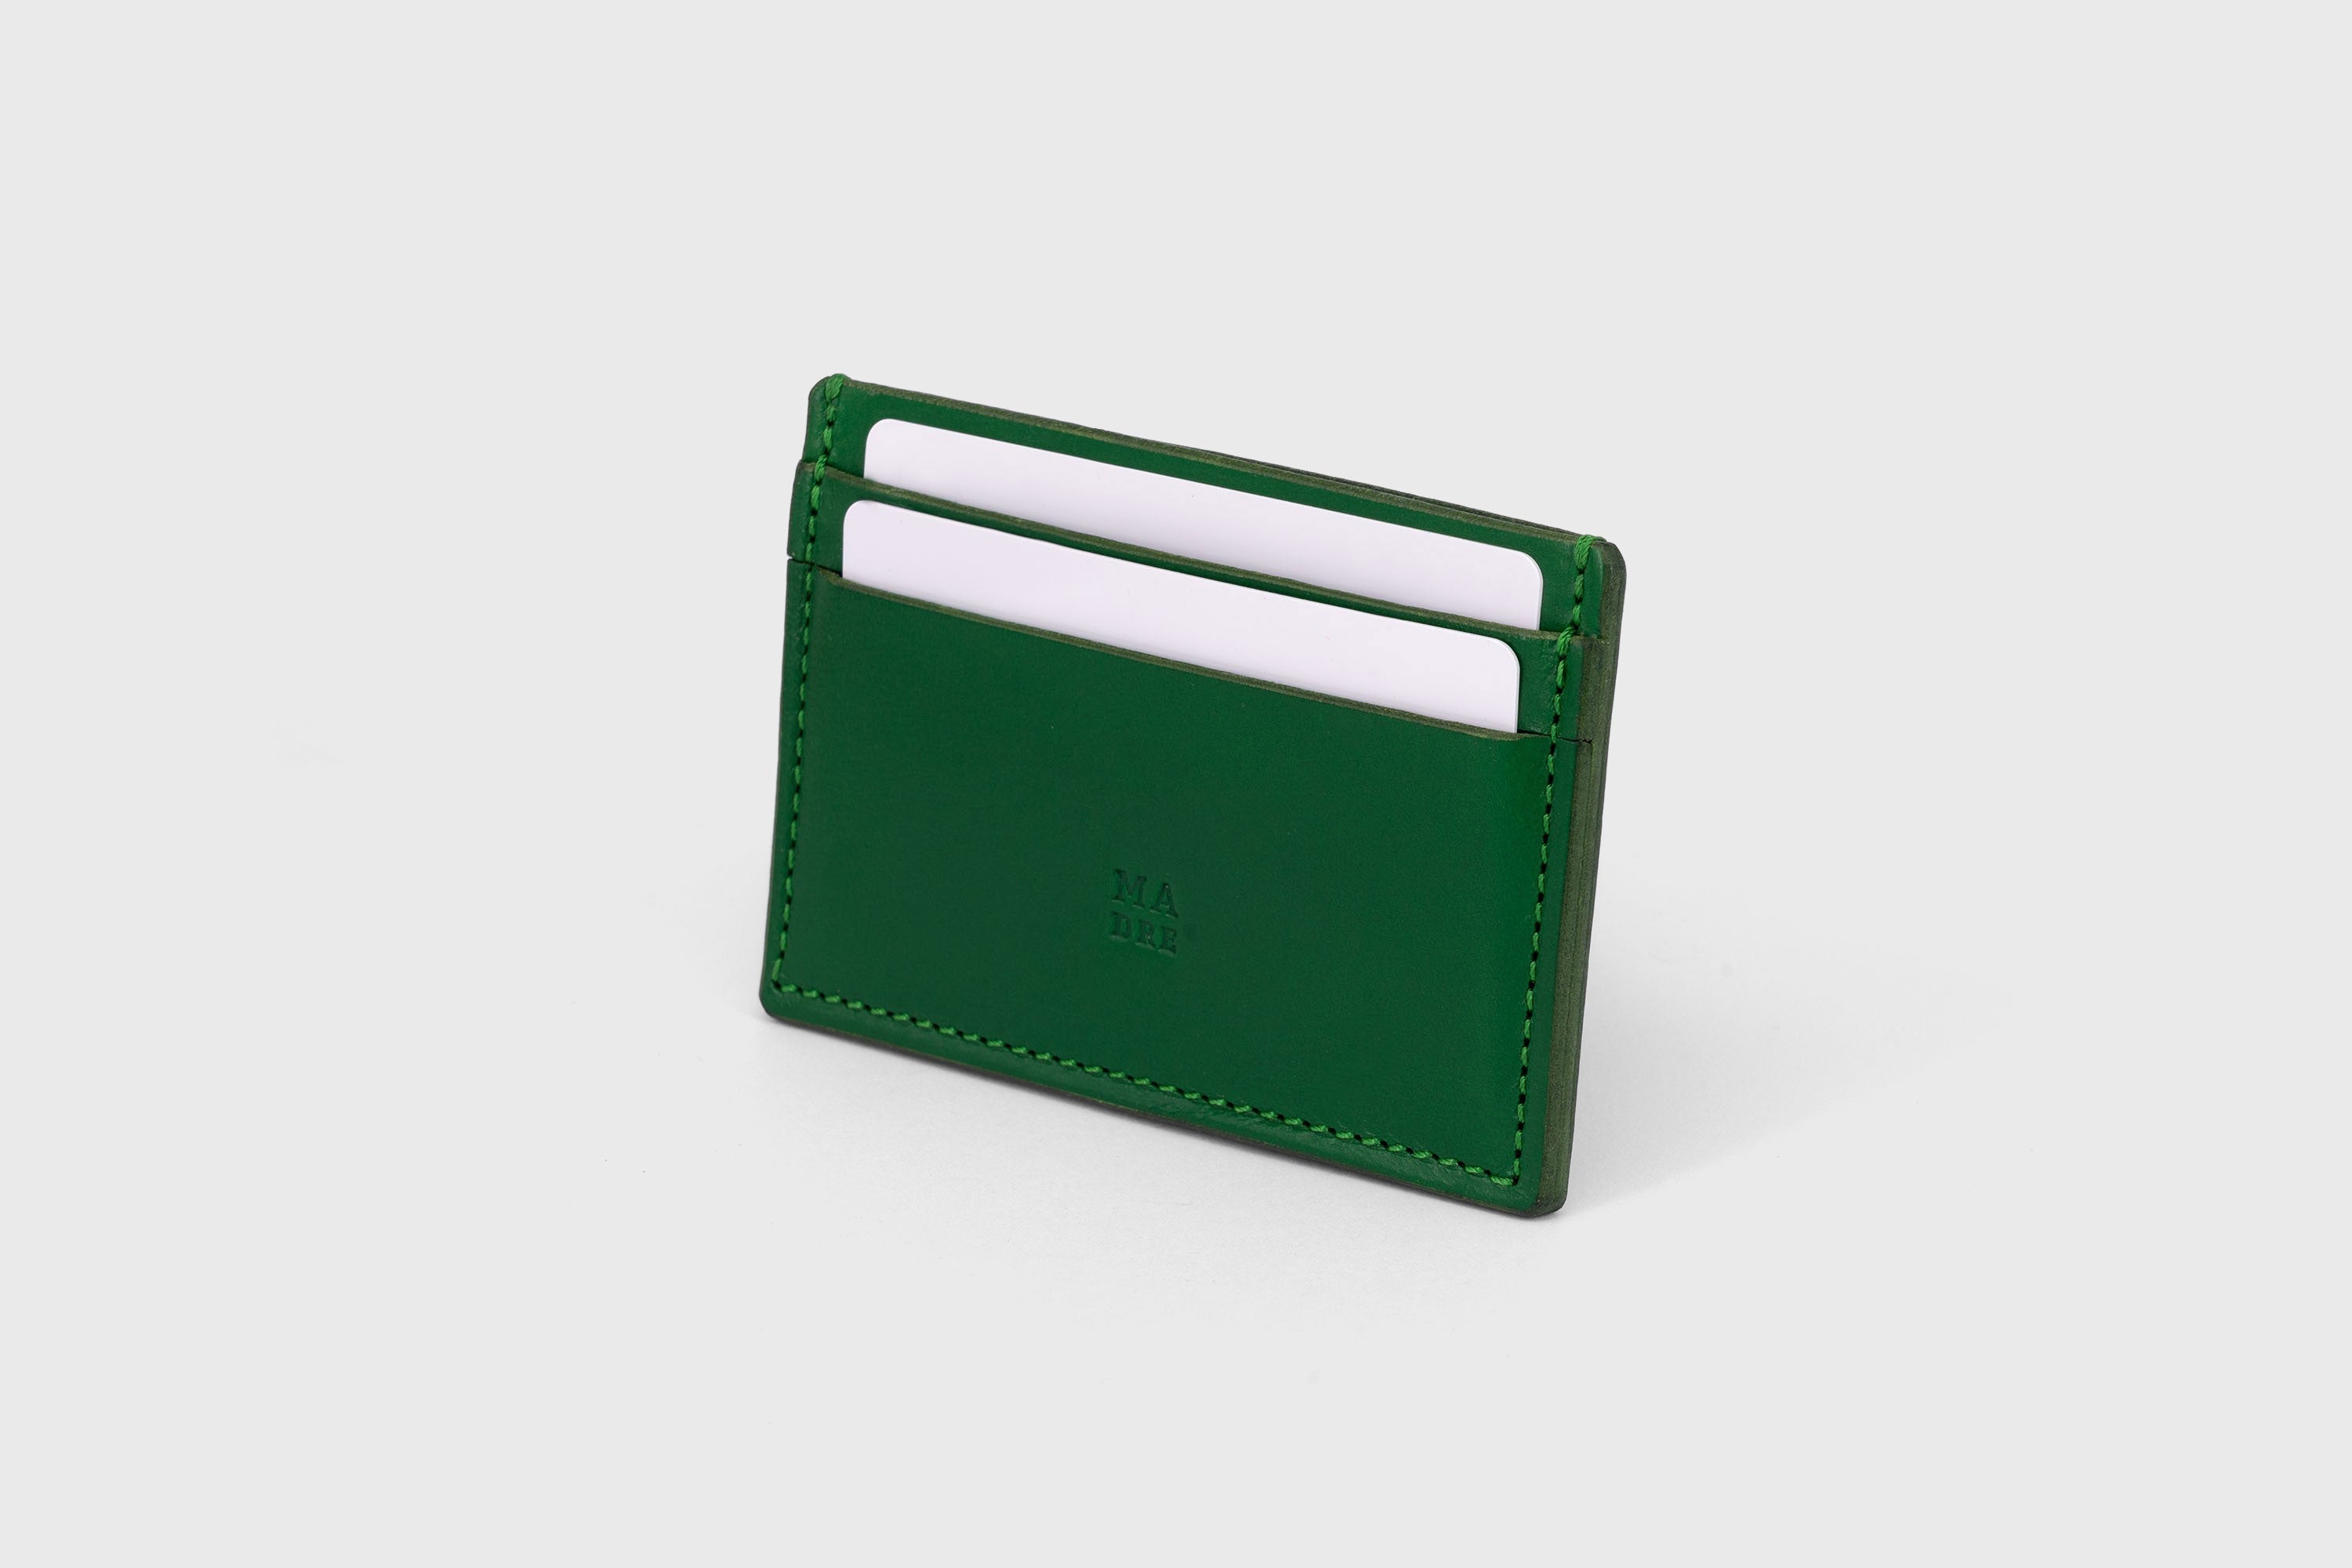 Credit Card Wallet in Grass Green Leather Vachetta Vegetable Tanned Leather Handmade Craftmanship and Design by Atelier Madre Manuel Dreesmann Barcelona Spain